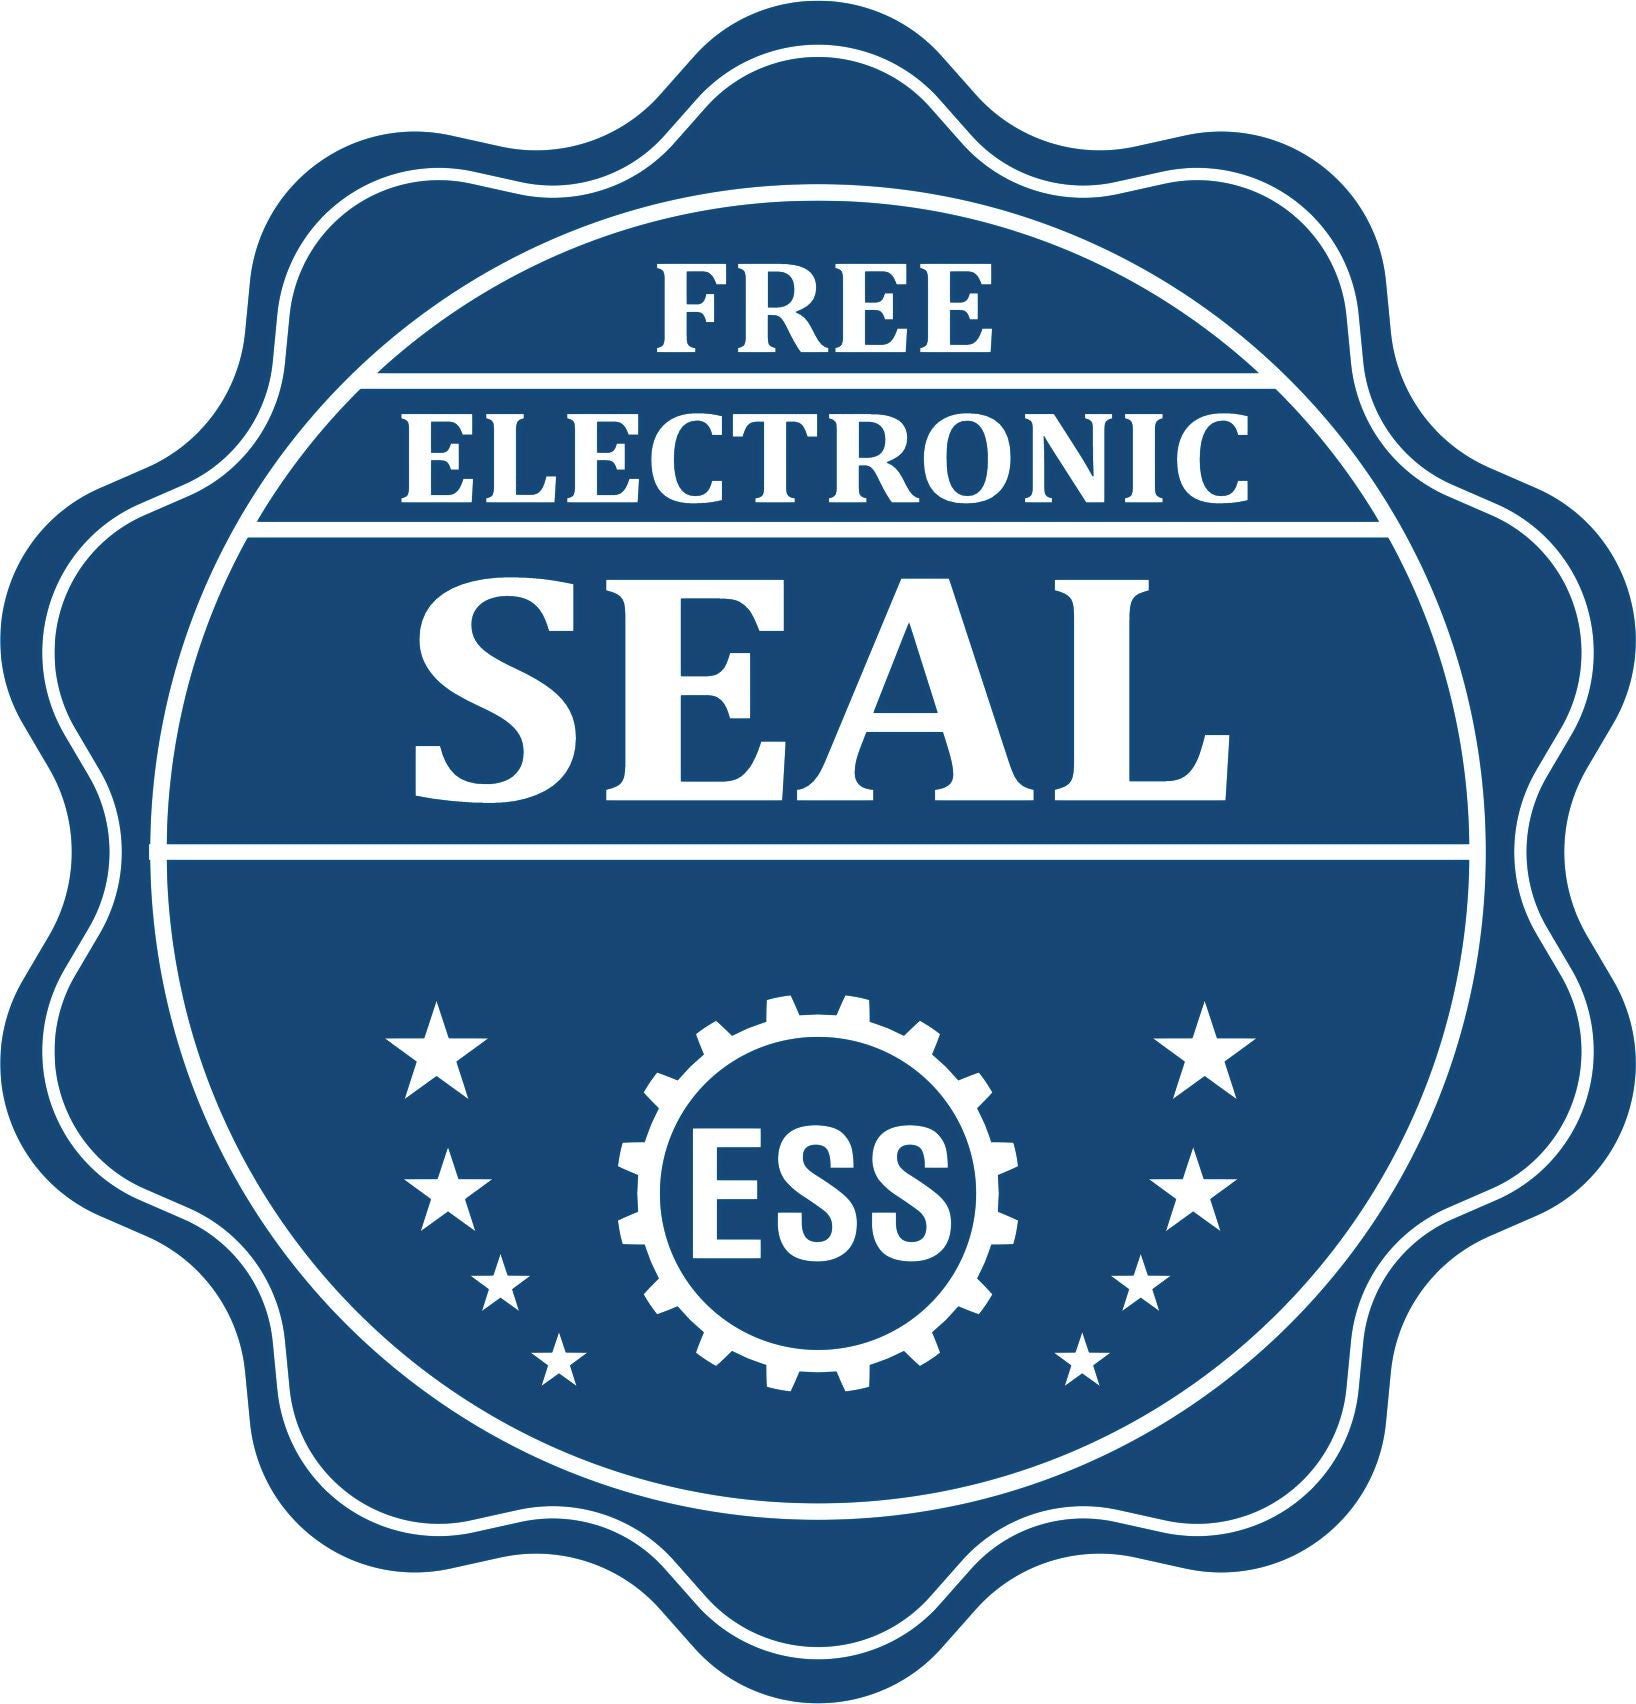 A badge showing a free electronic seal for the Handheld Wisconsin Professional Engineer Embosser with stars and the ESS gear on the emblem.